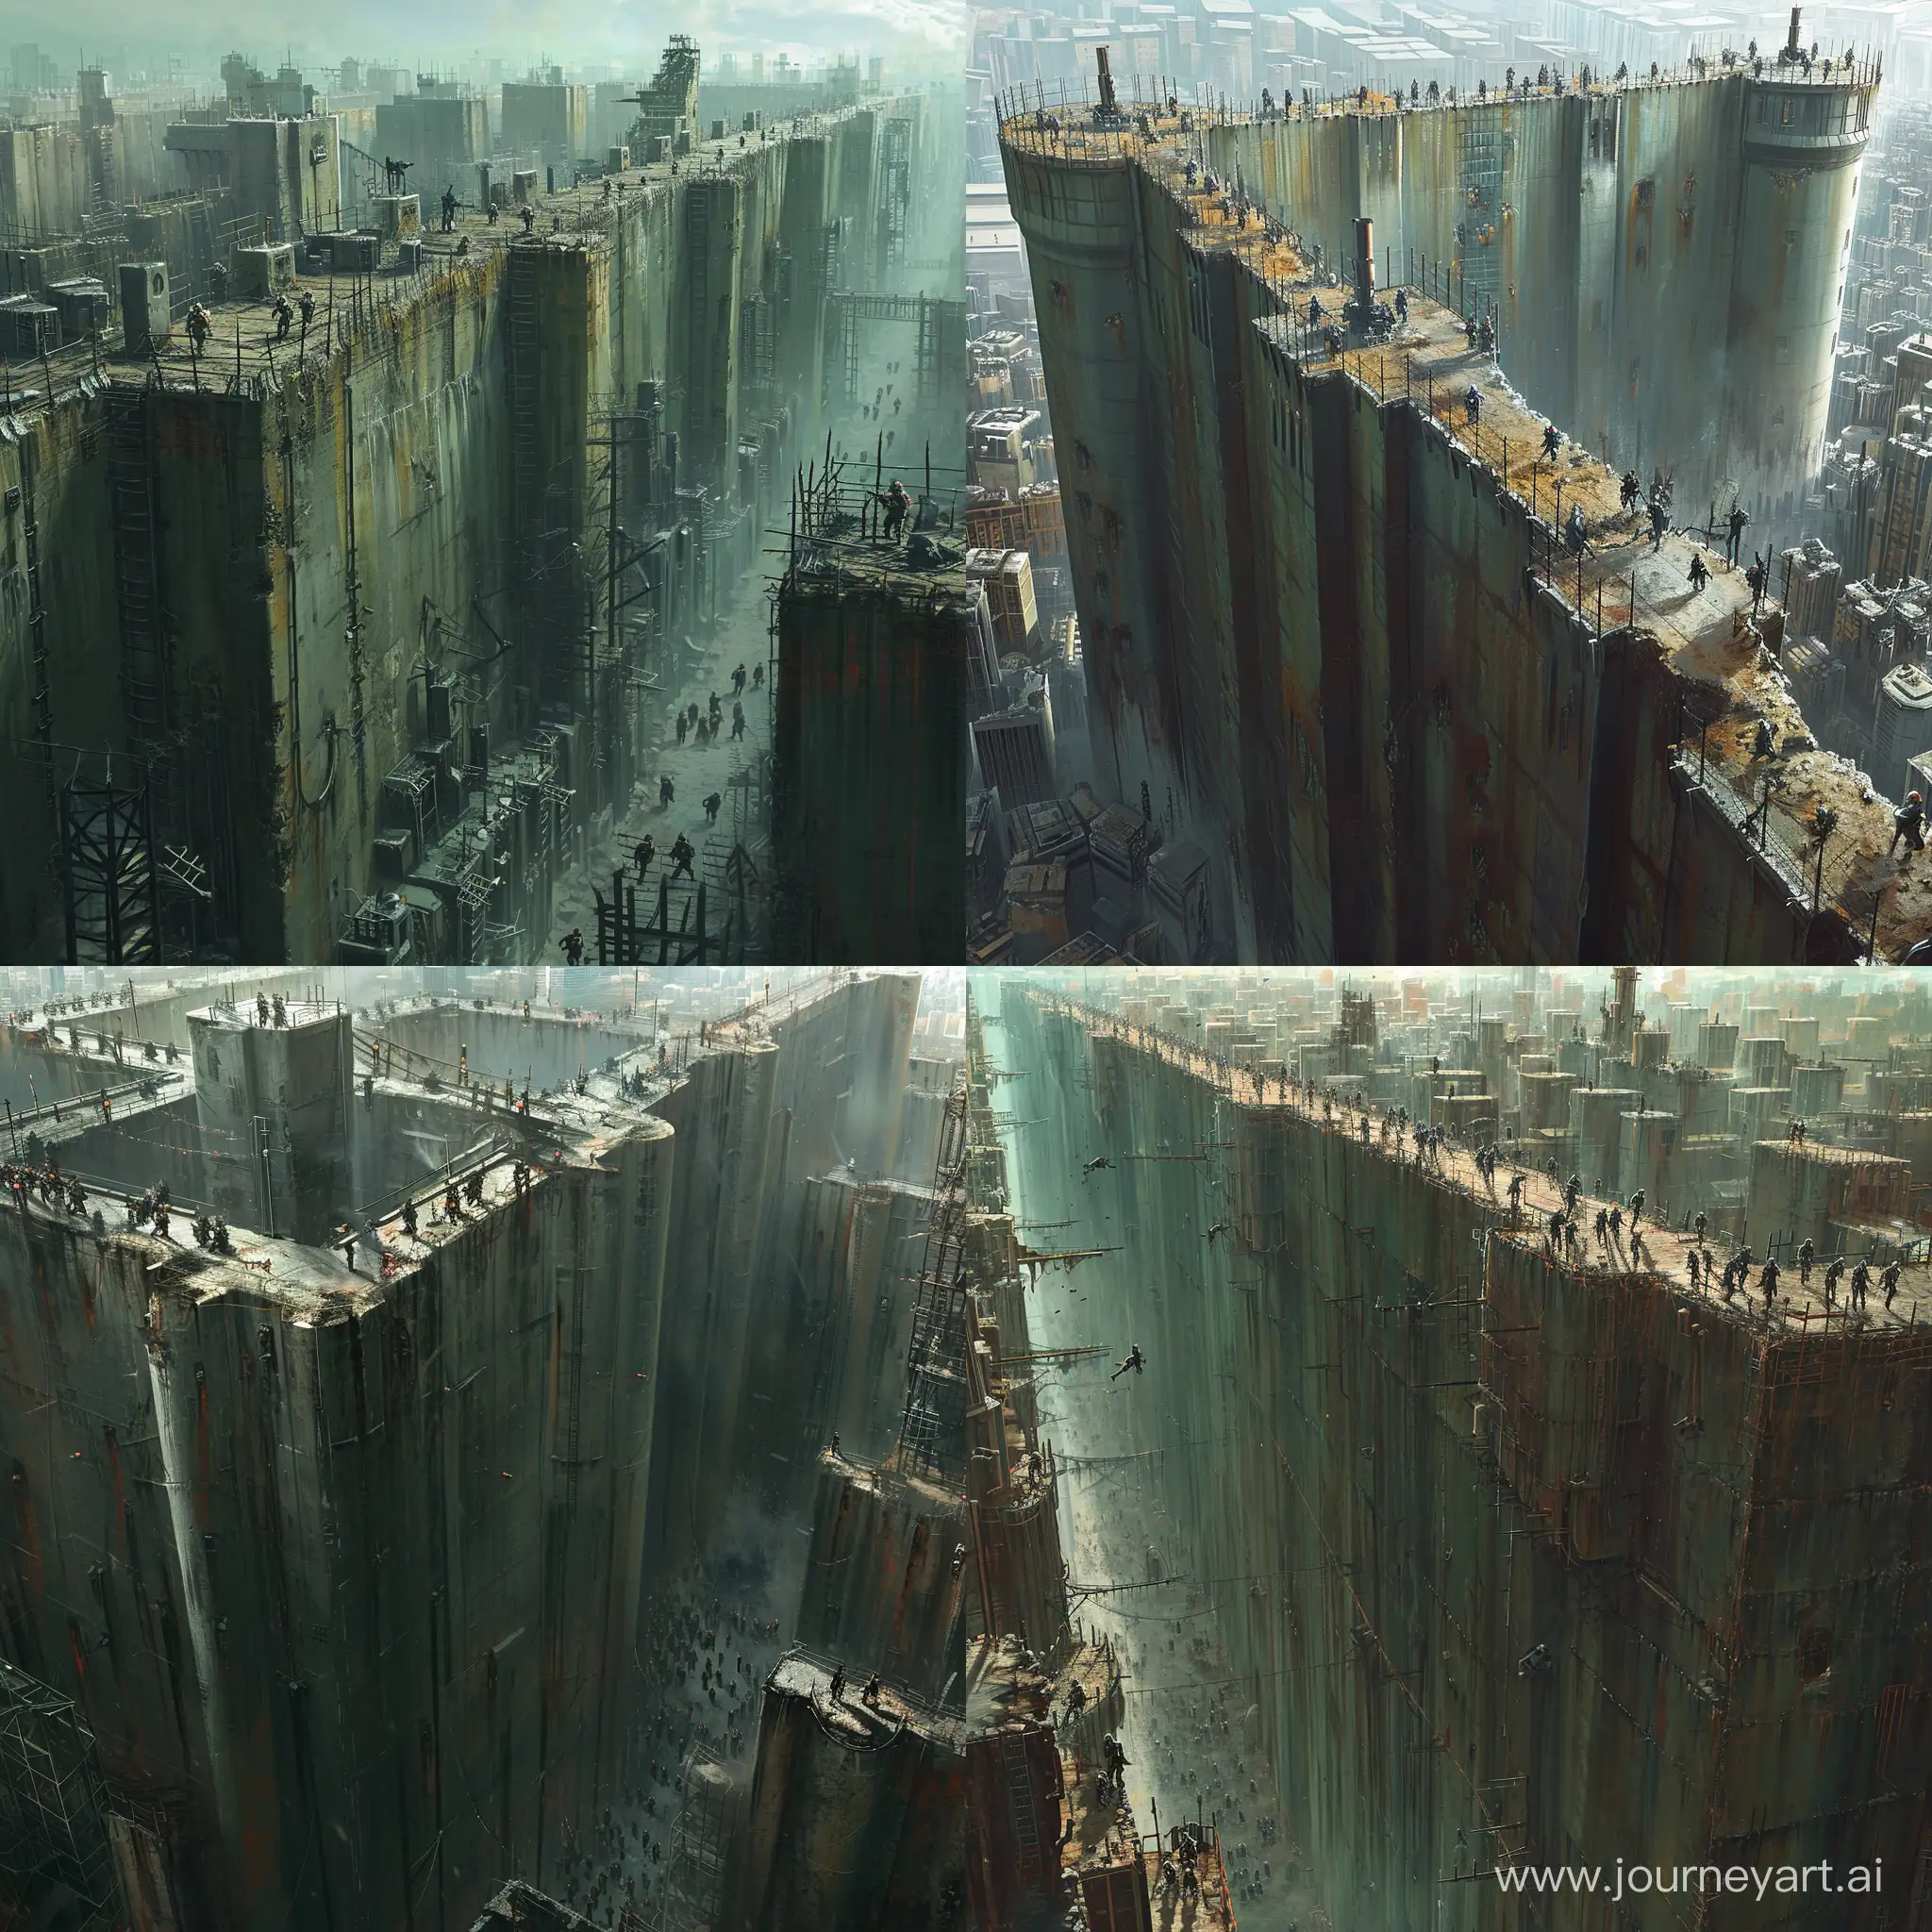 Defensive-Cityscape-with-Tall-Metal-Walls-and-Zombie-Threat